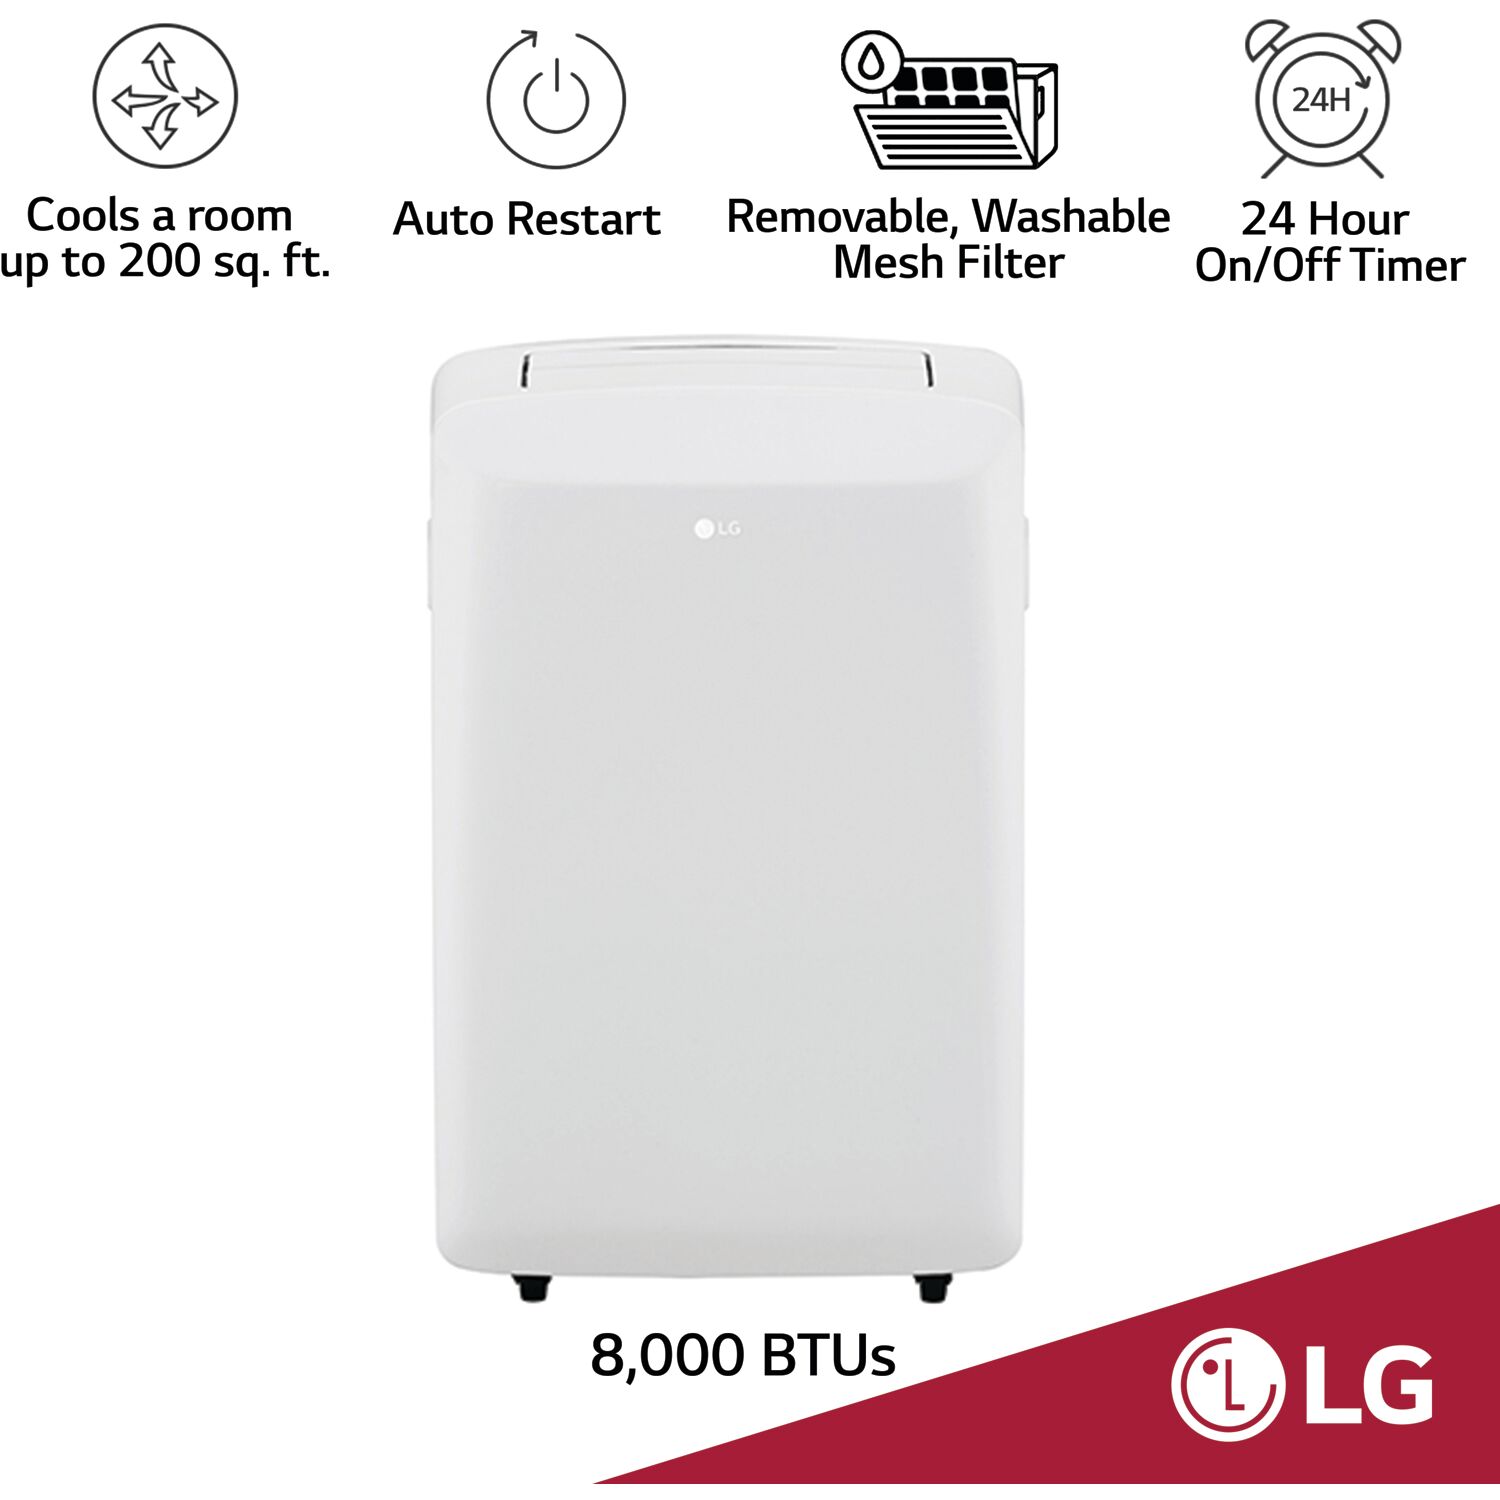 LG 115V Portable Air Conditioner with Remote Control in White for Rooms up to 200 Sq. Ft. - image 4 of 7